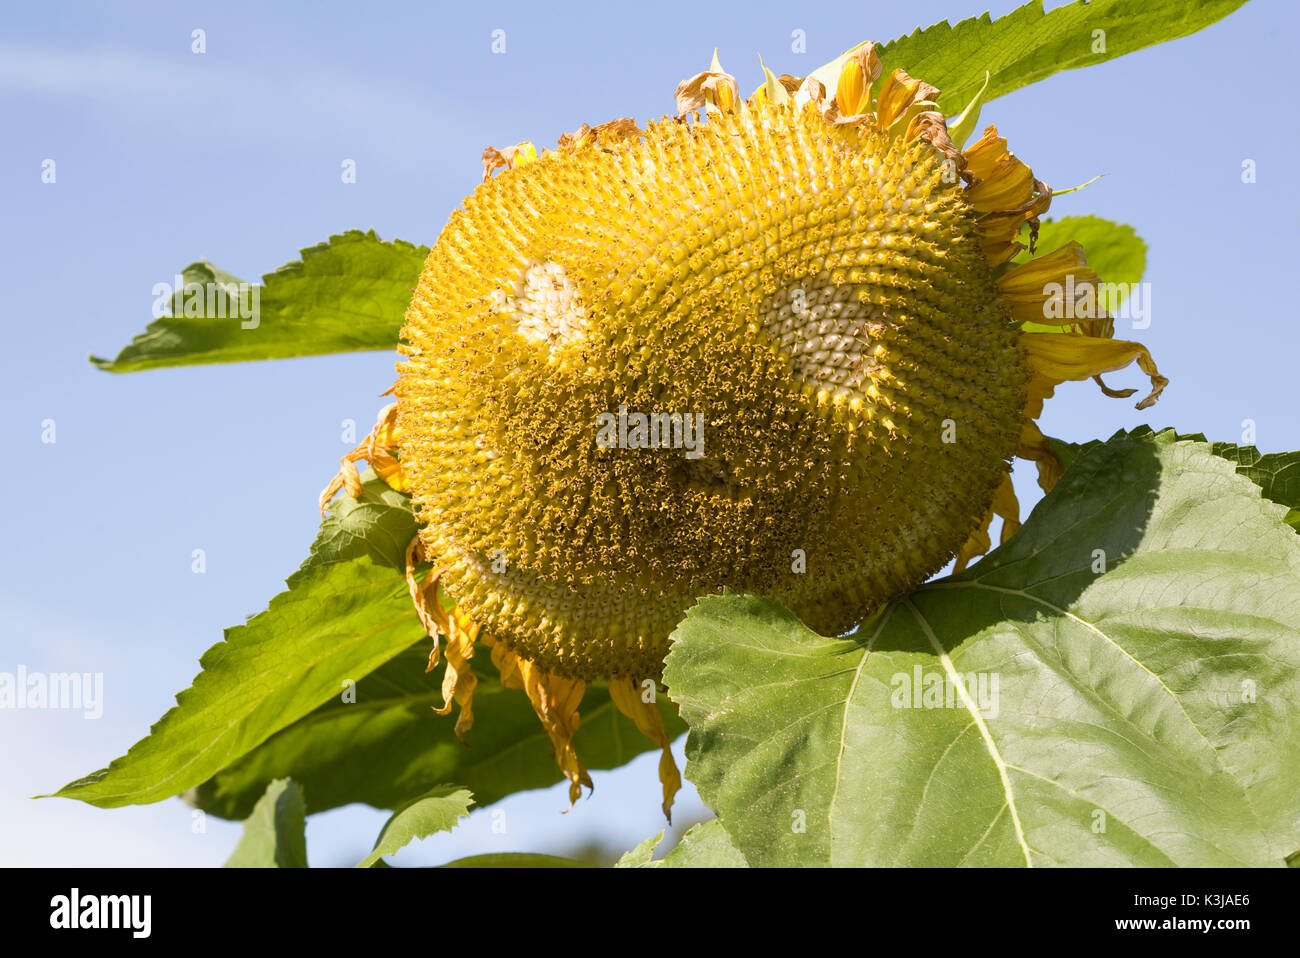 Helianthus annuus. Large sunflower gone to seed. Stock Photo